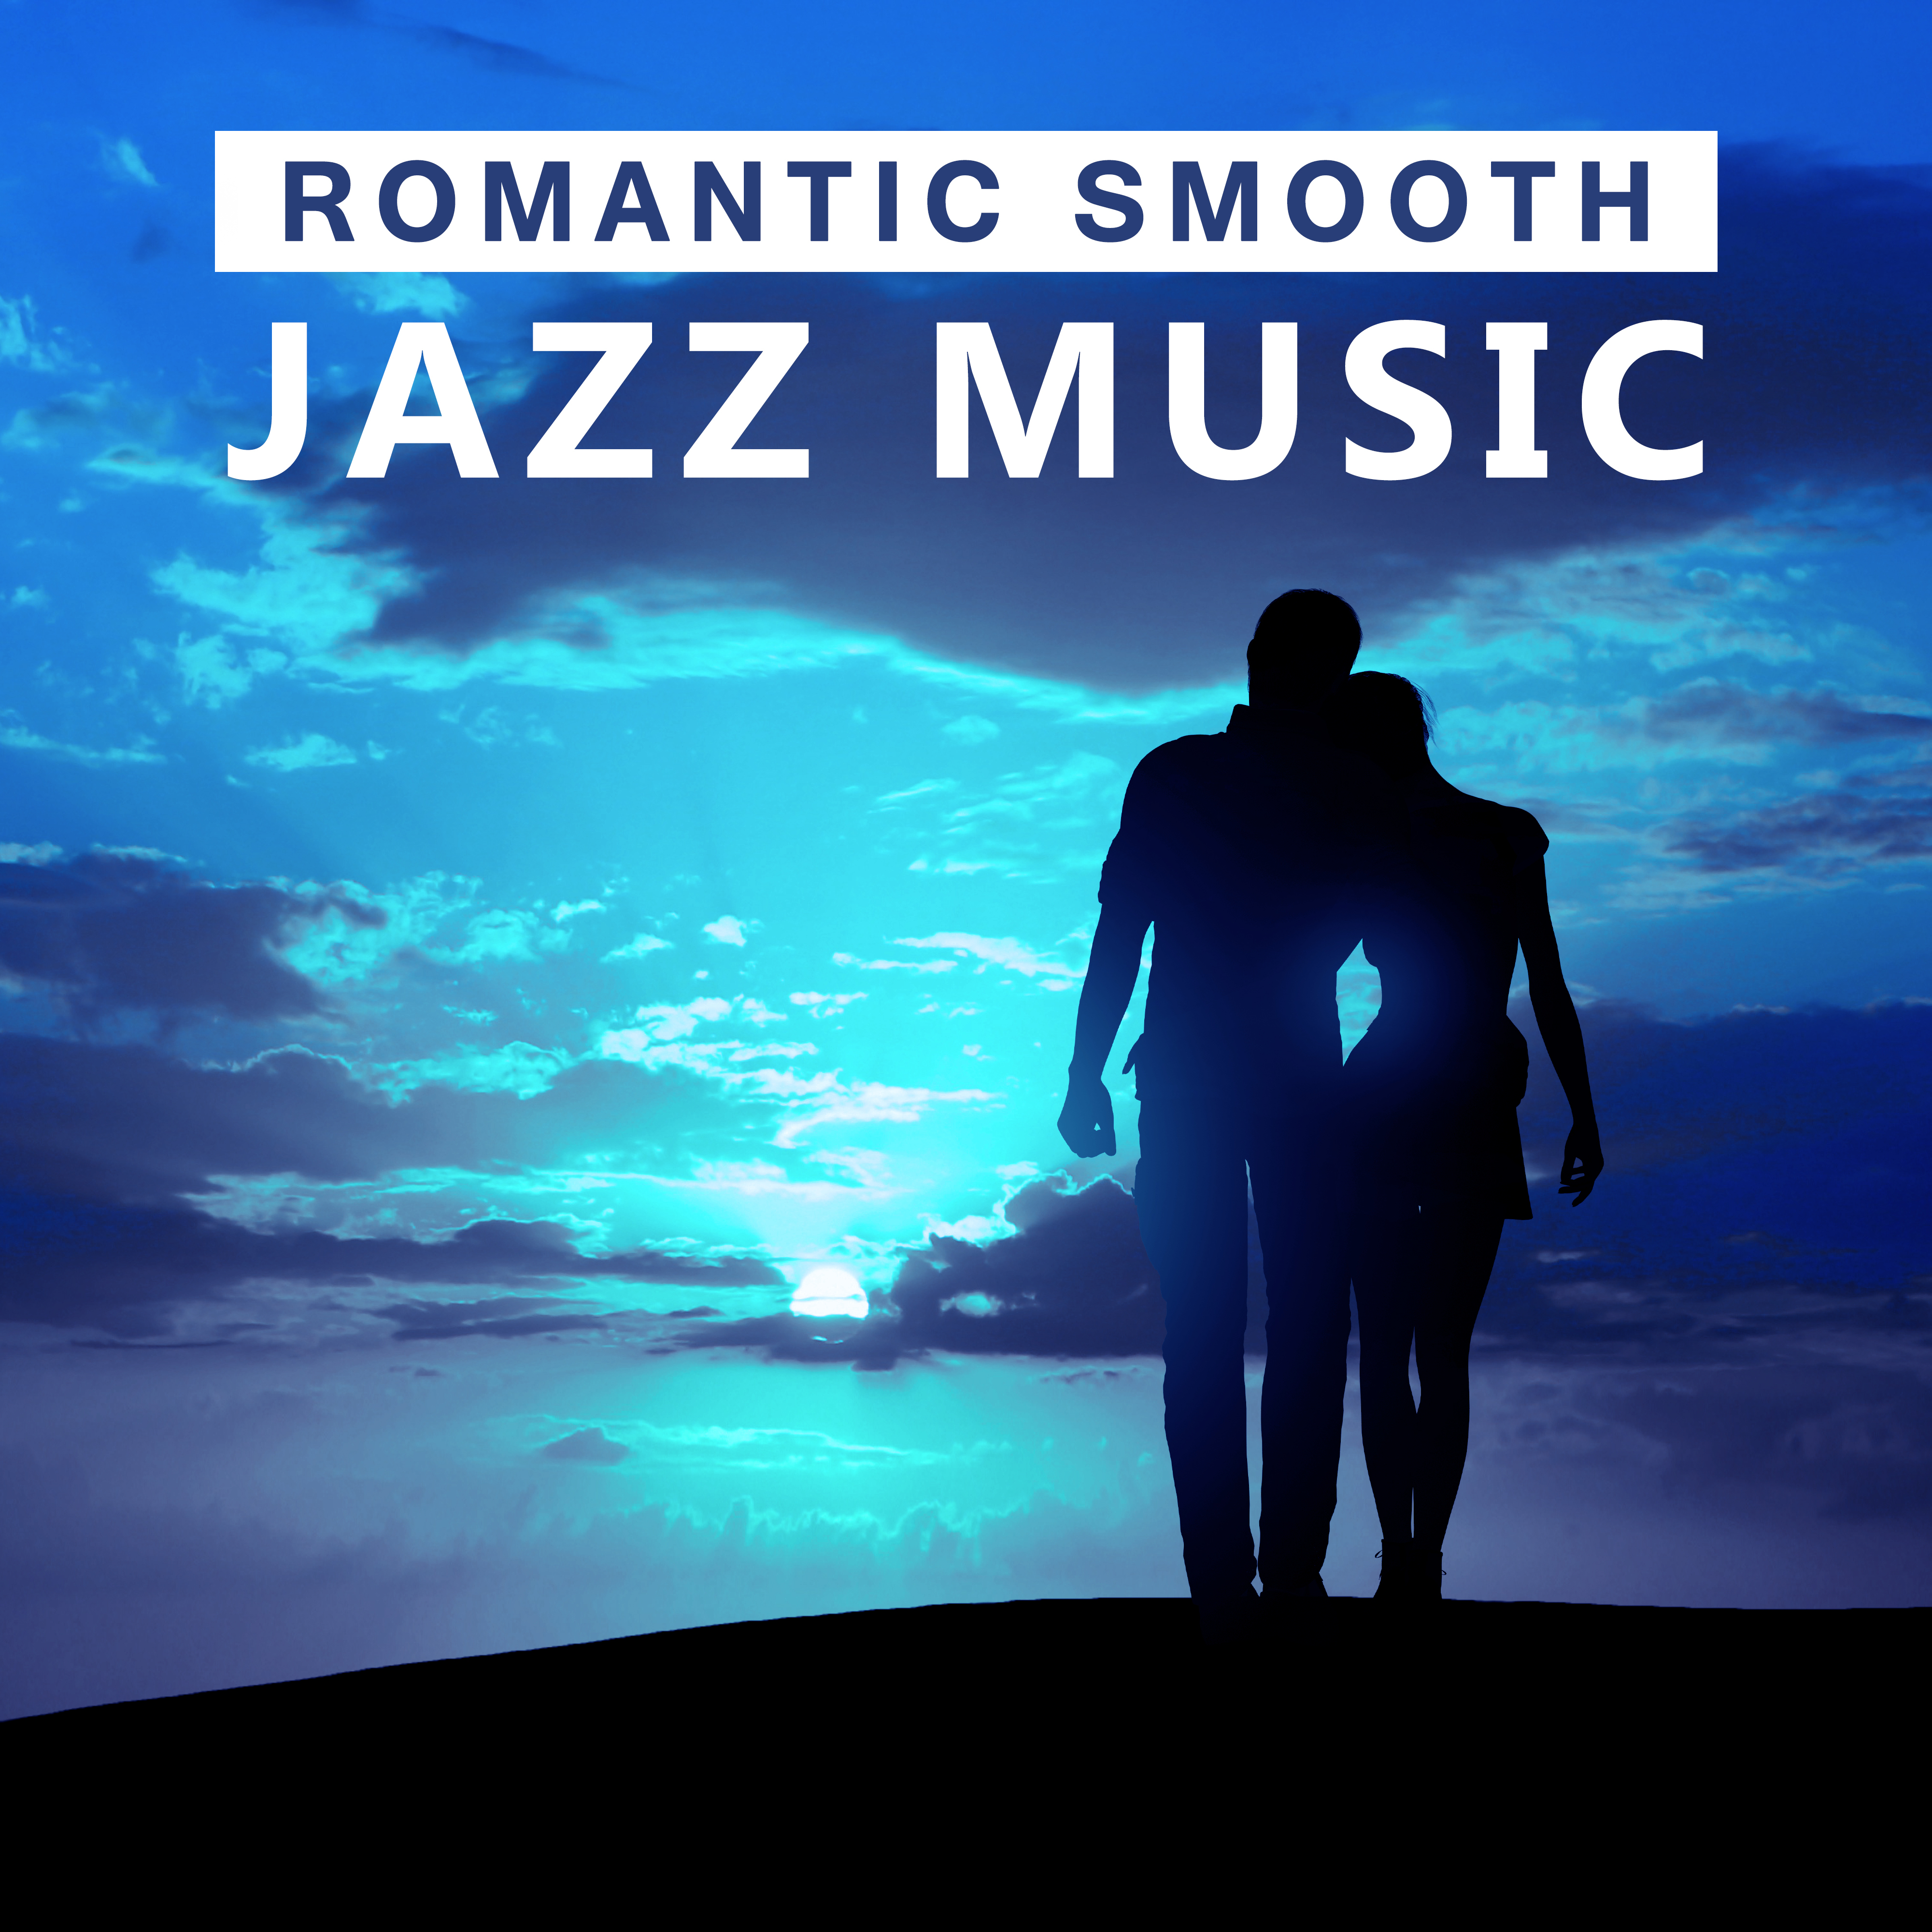 Romantic Smooth Jazz Music  Calm Sounds for Lovers, Hot Massage,  Jazz Songs, Romantic Evening